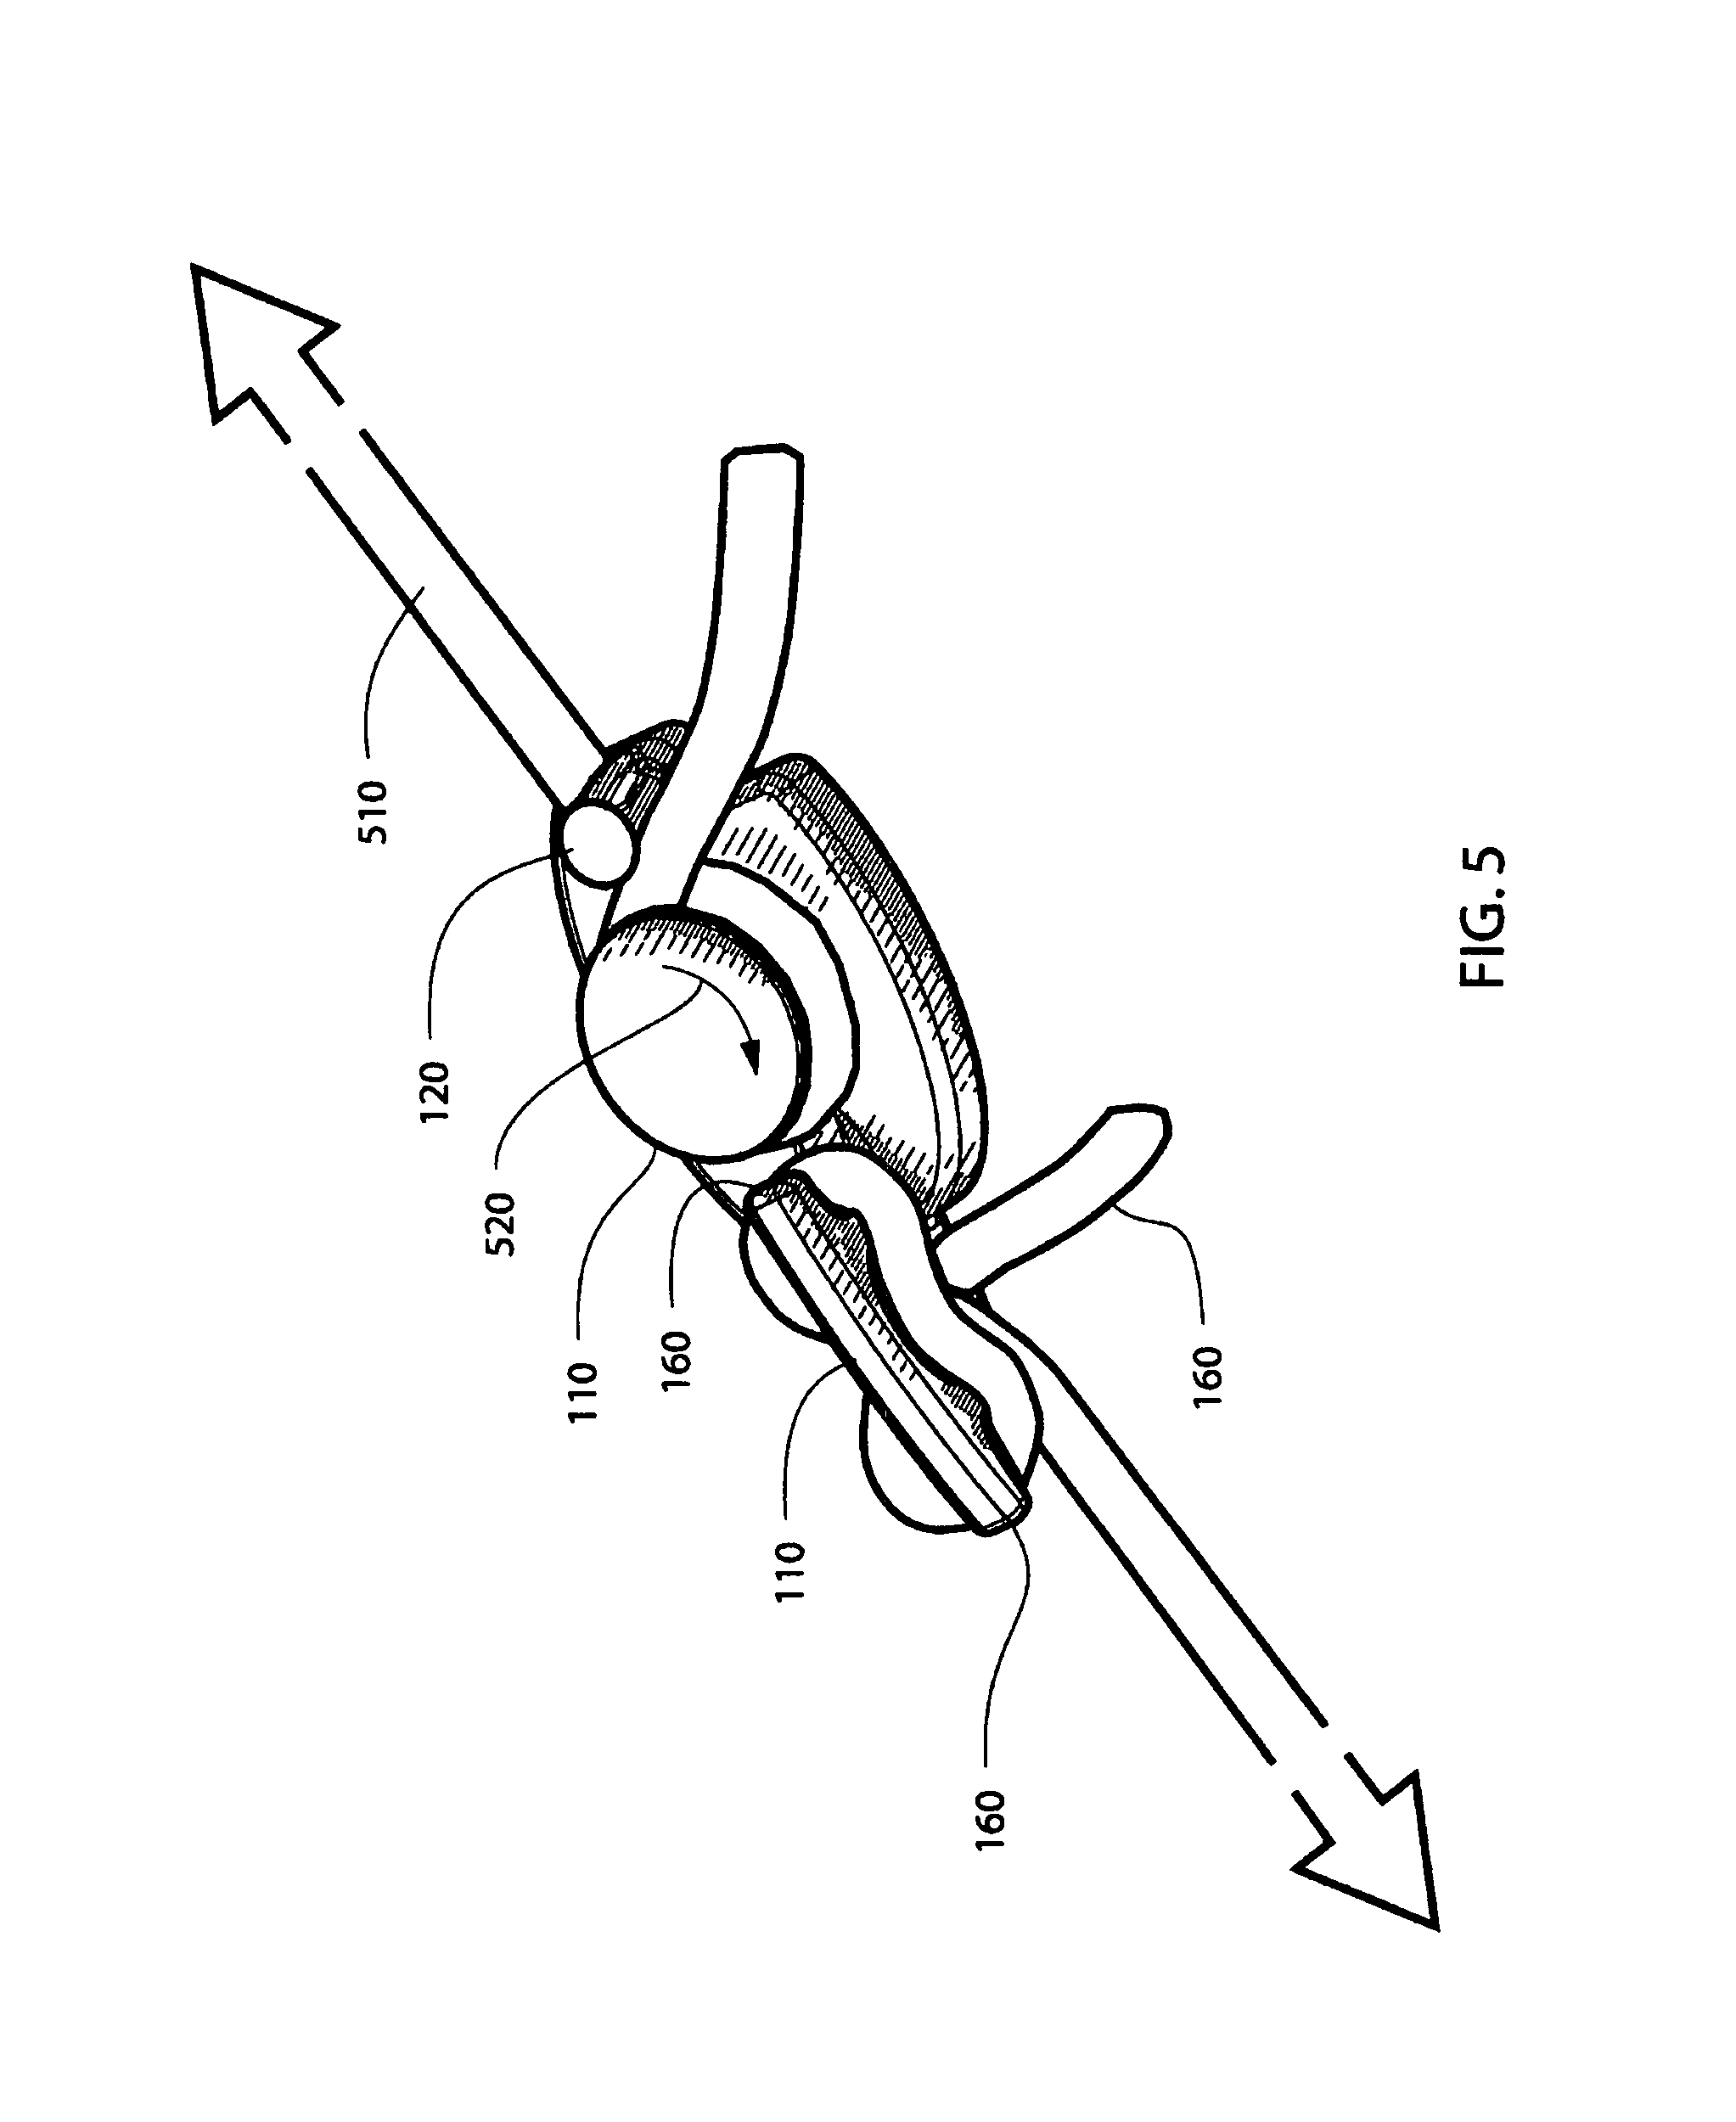 Device for quick fastening and tension adjustment of multiple cord configurations